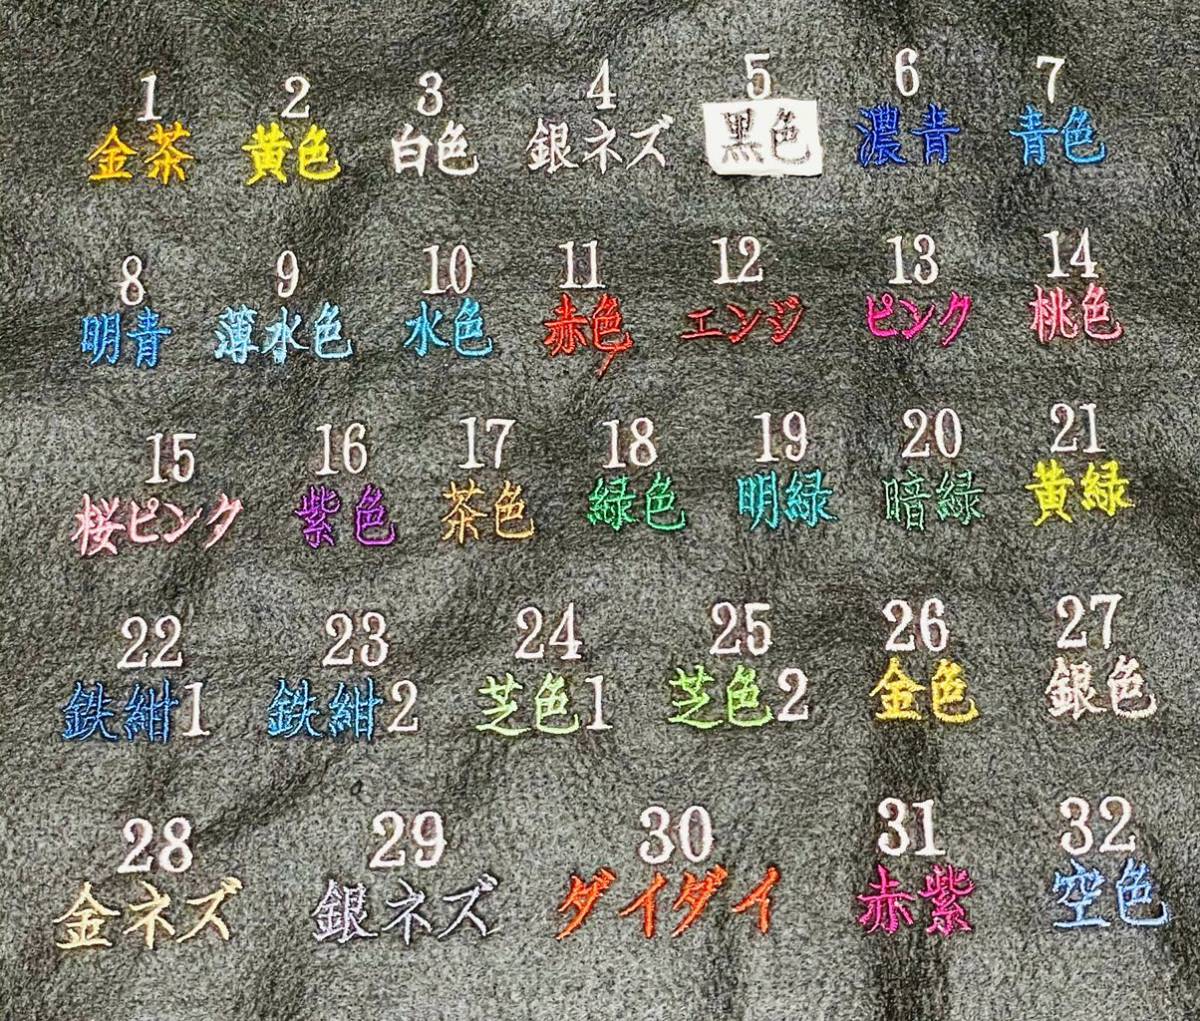  kendo for embroidery shide name .* shide number * shide name * one side * name character . somewhat smaller specification * thread color . selection .. *No.231